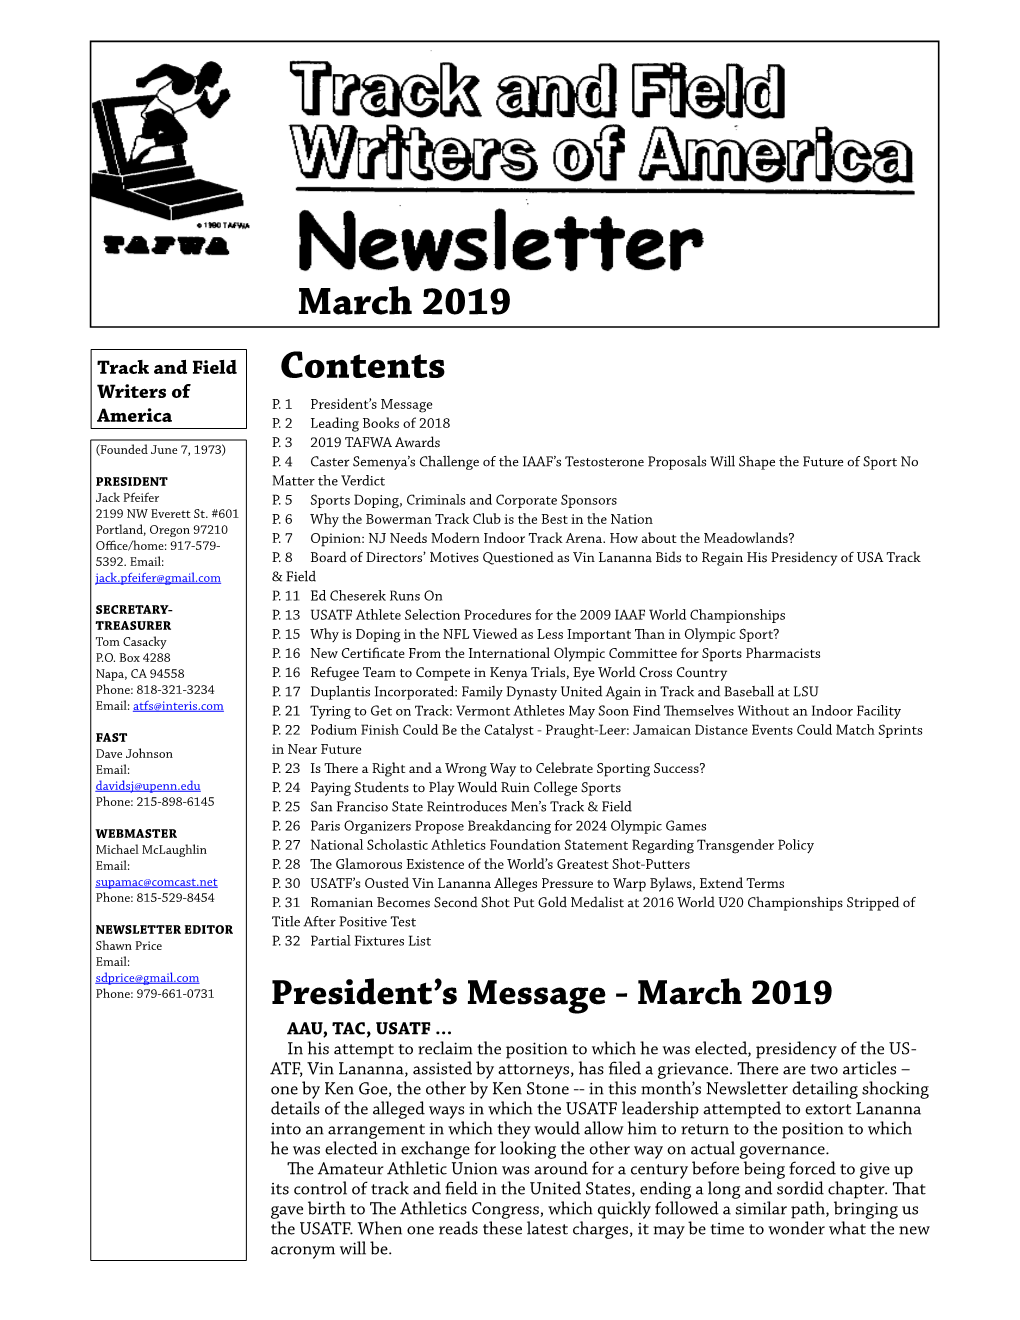 March 2019 Contents